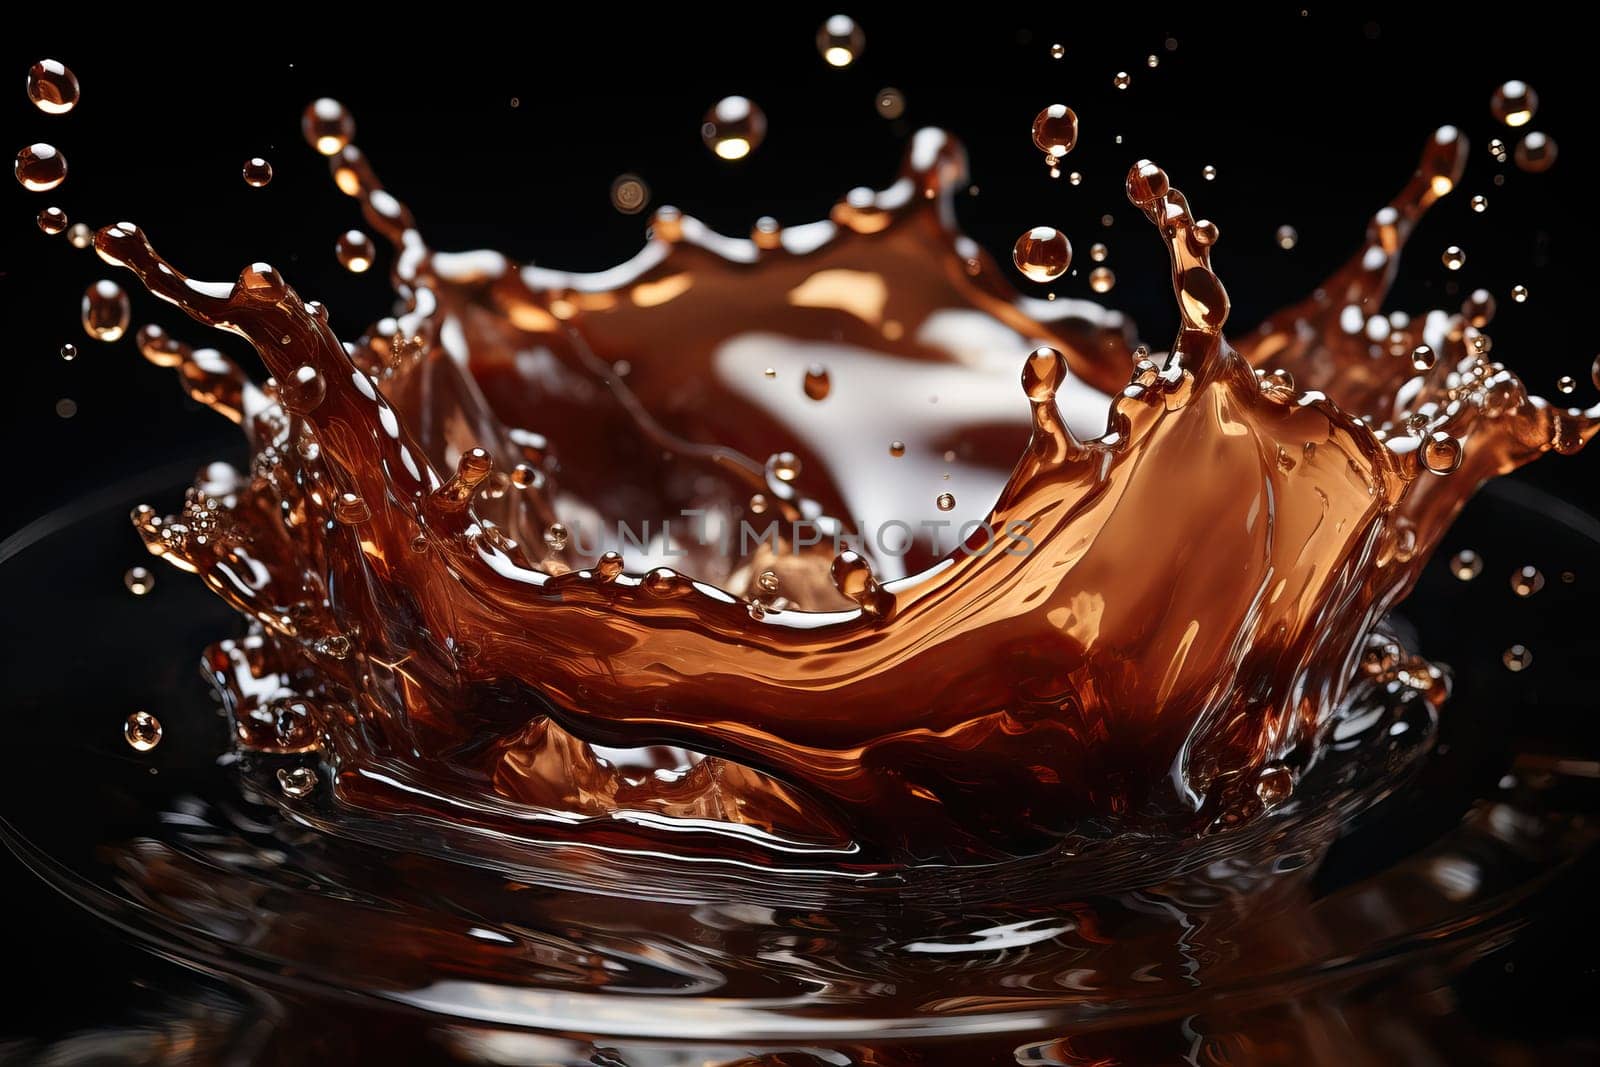 Liquid soda, splashes and drops of chocolate on a black background.